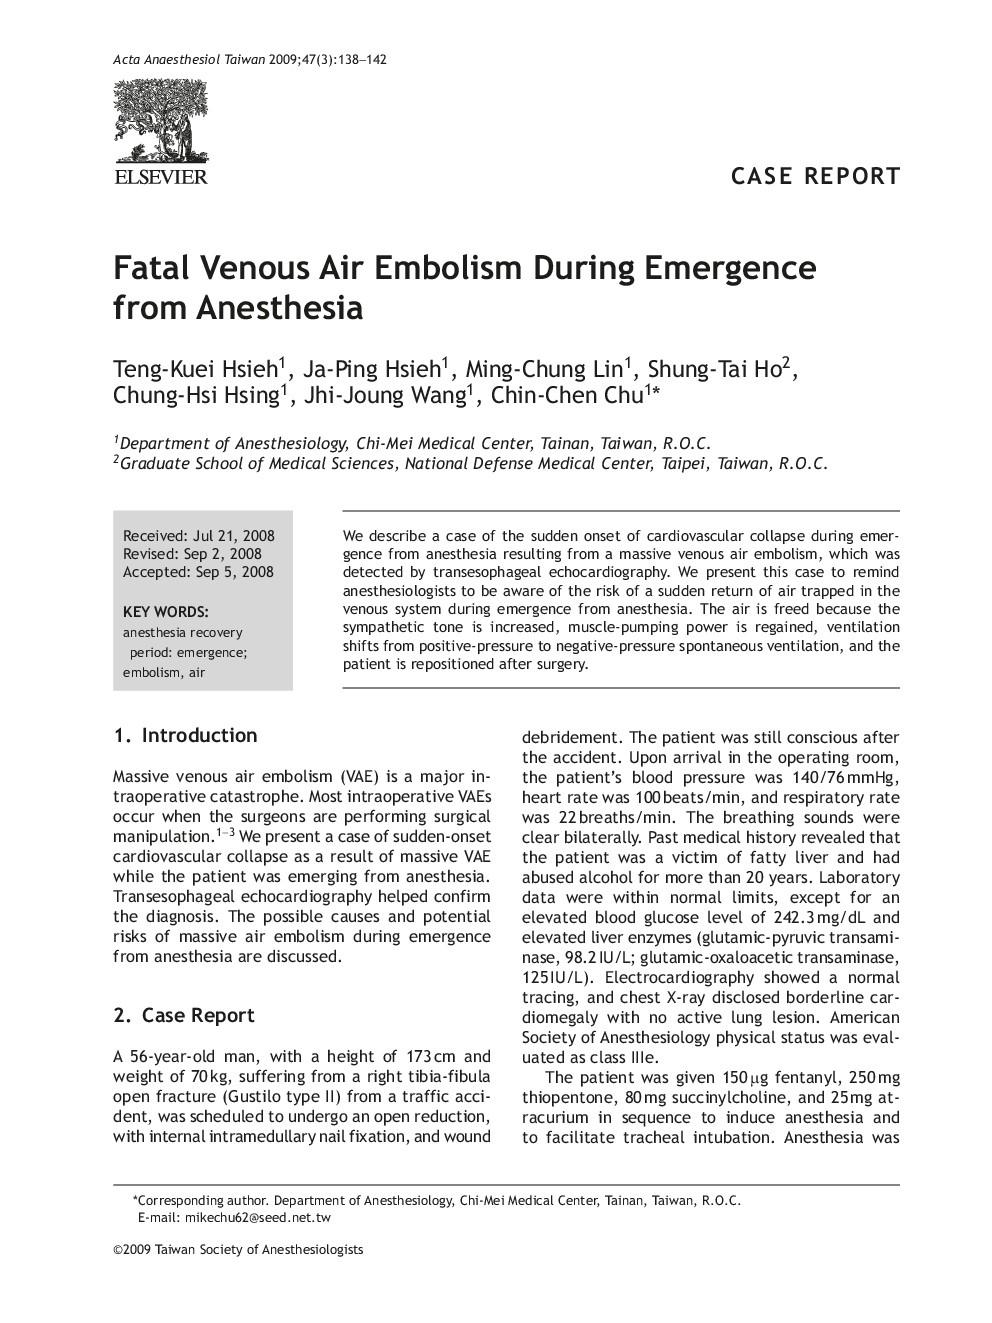 Fatal Venous Air Embolism During Emergence from Anesthesia